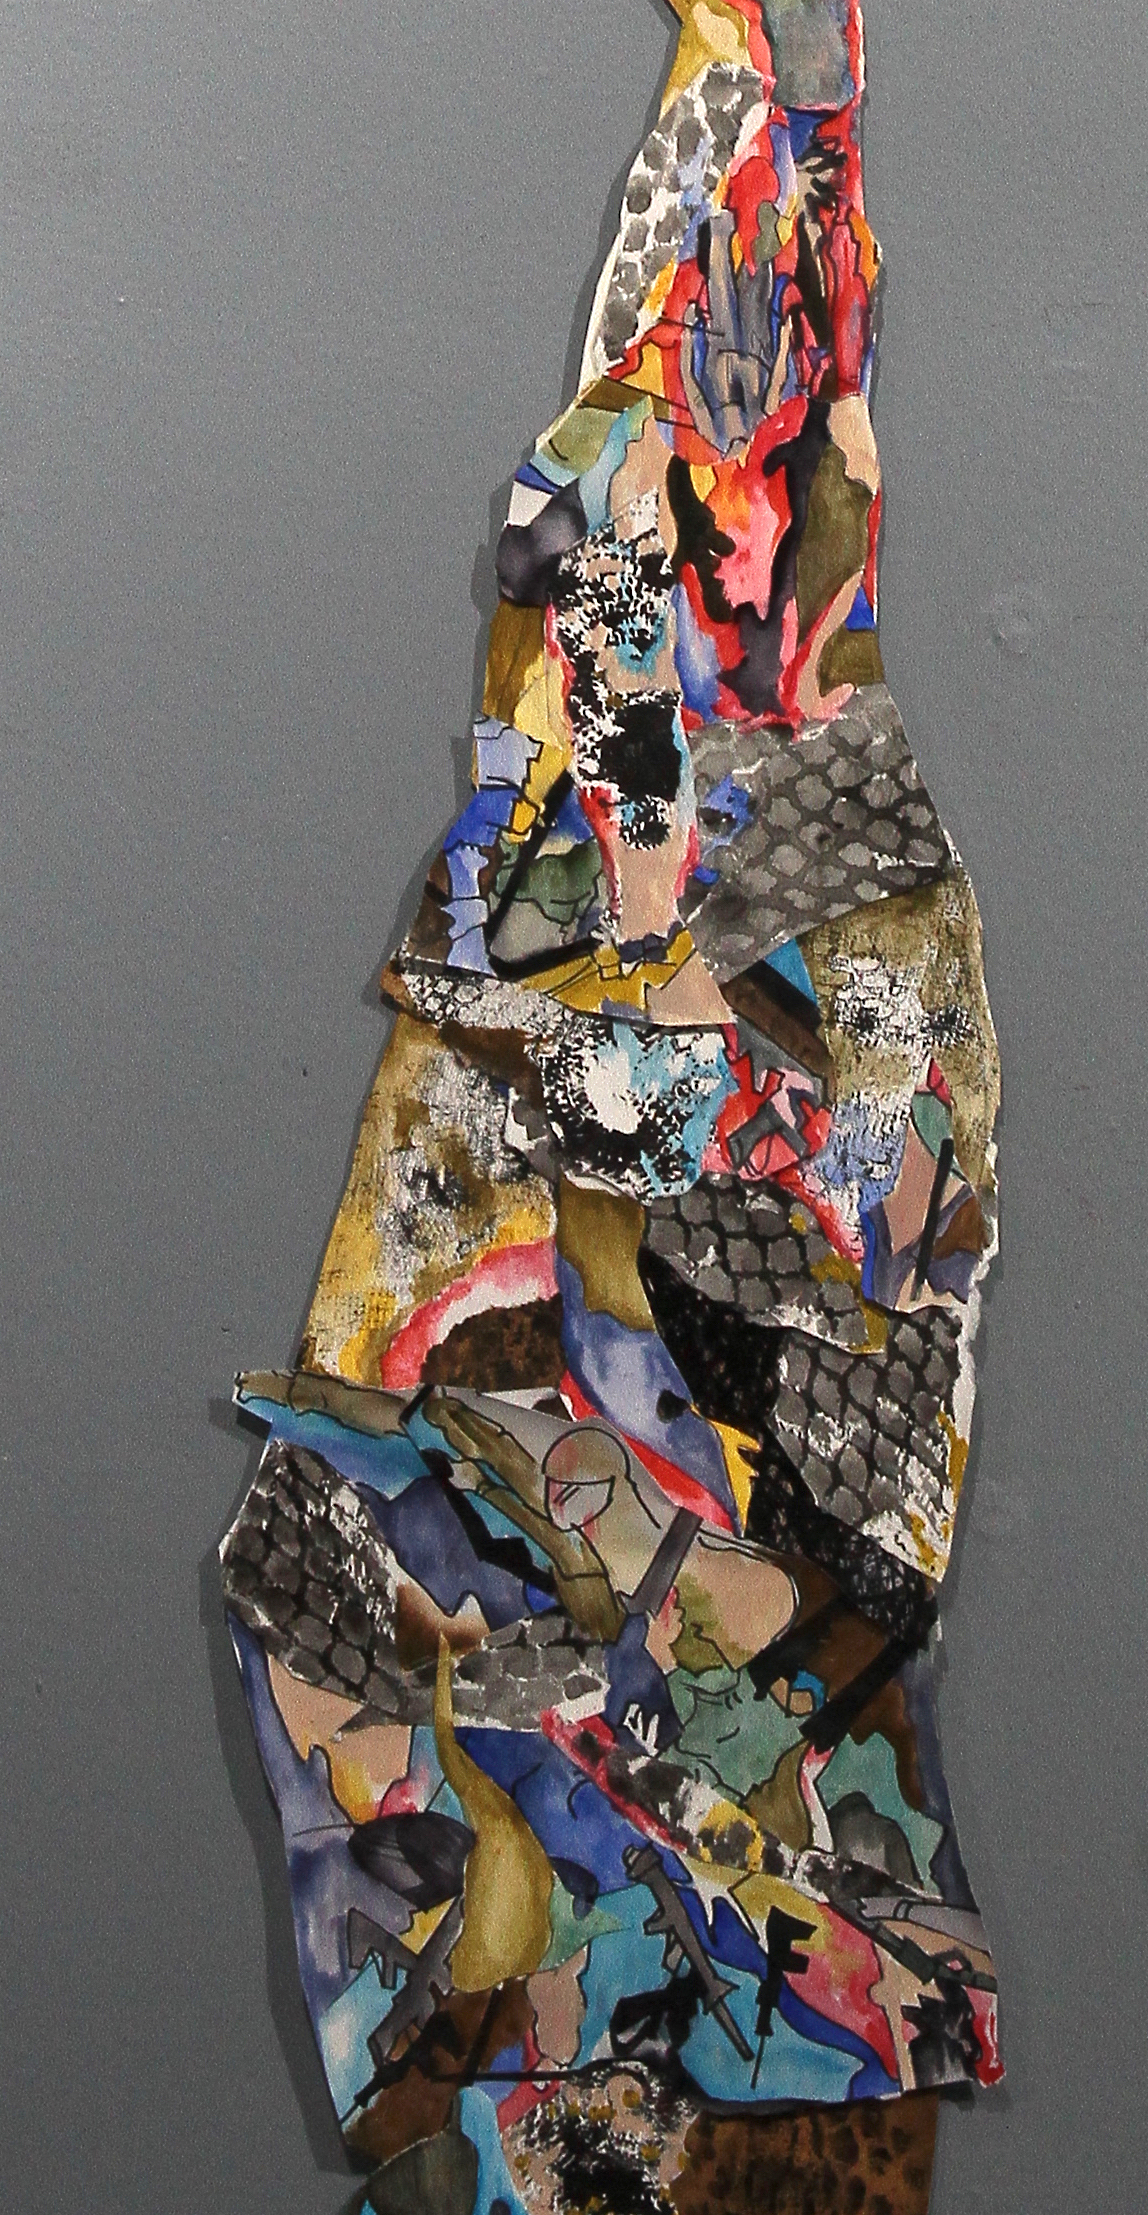 14_detail_figure_with_bundle_2016_collage